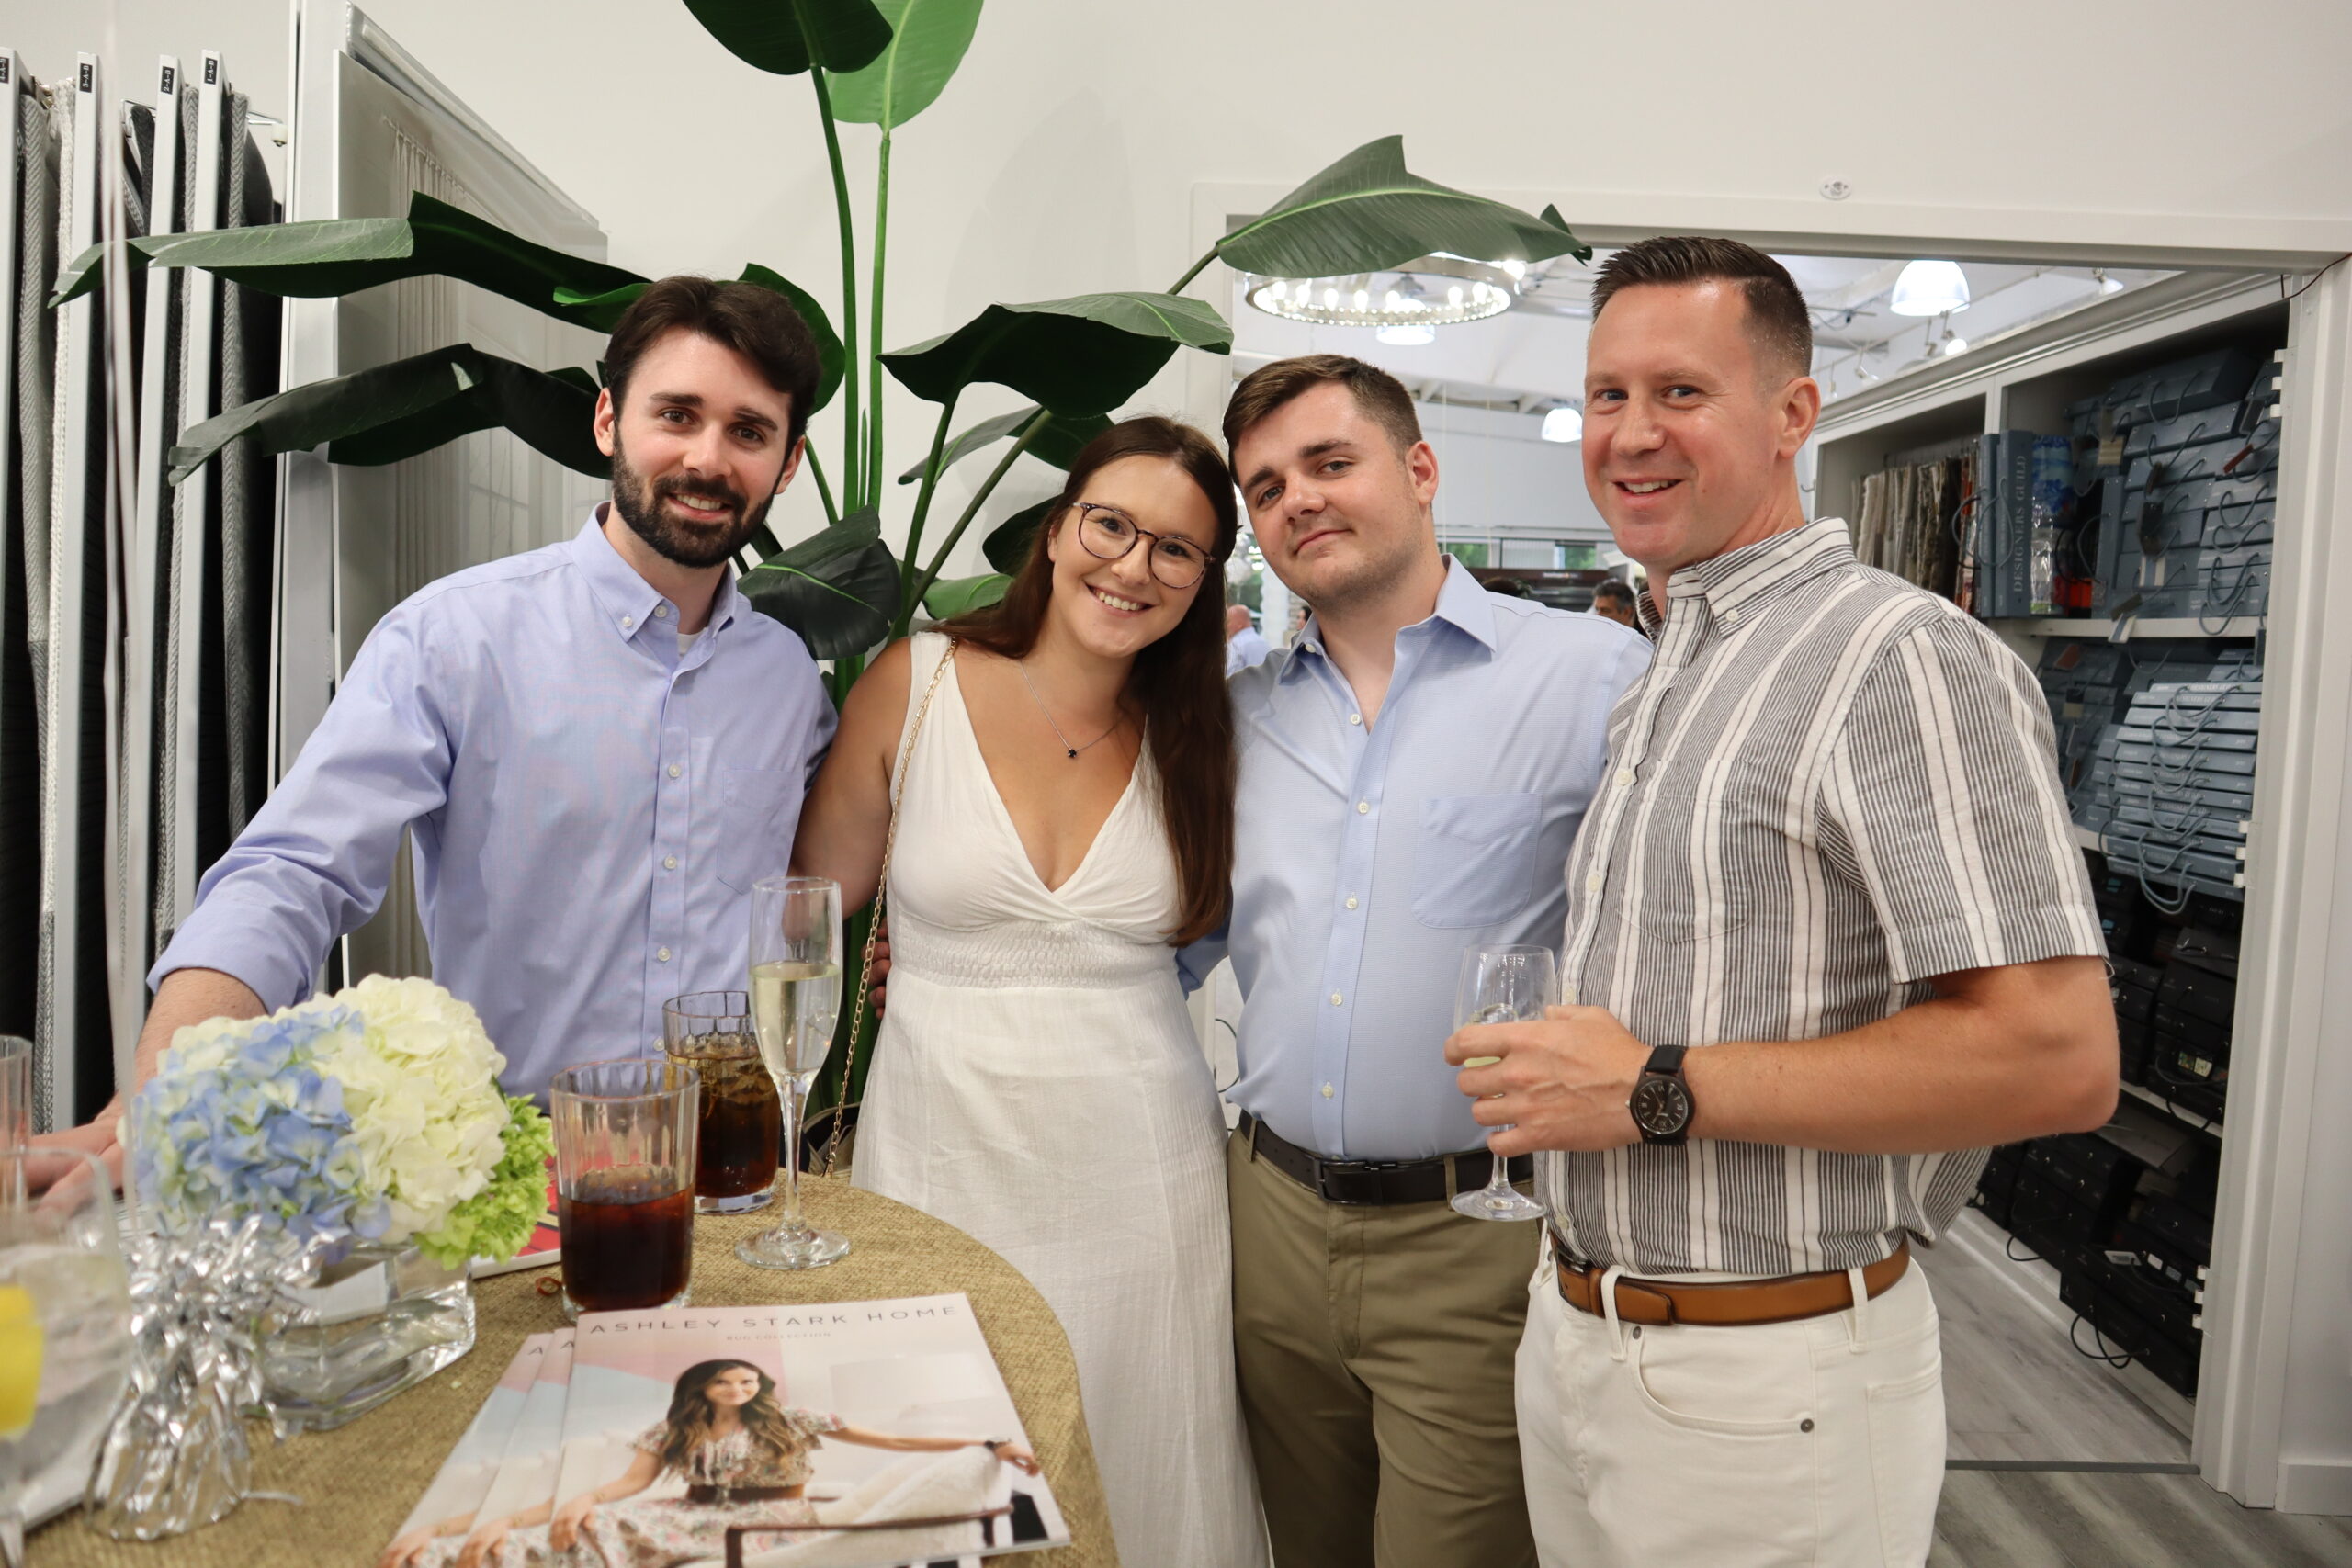 Conor Gill, left, and Colby Gill, vice president of operations at The Carpetman, center right, are sons of Robert Gill, president and owner of The Carpetman. They are pictured with Nikki Distefano, Colby’s girlfriend, center left, and Hal Renaudo, corporate sales manager at Prestige Mills, right. MEGAN NAFTALI